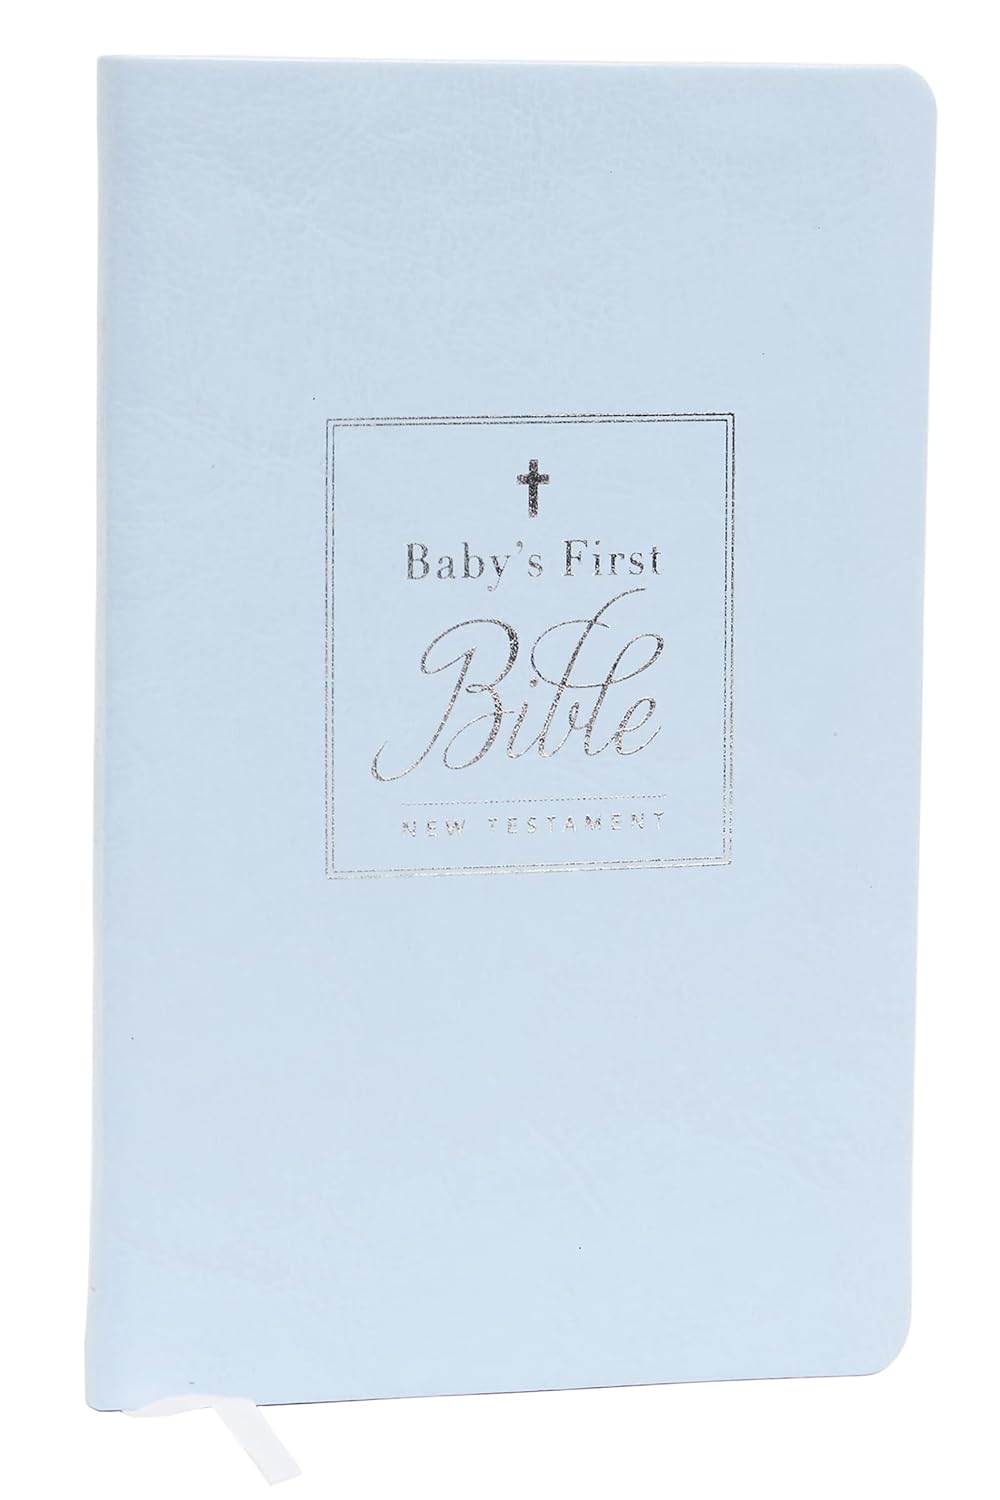 Baby's First Bible Blue